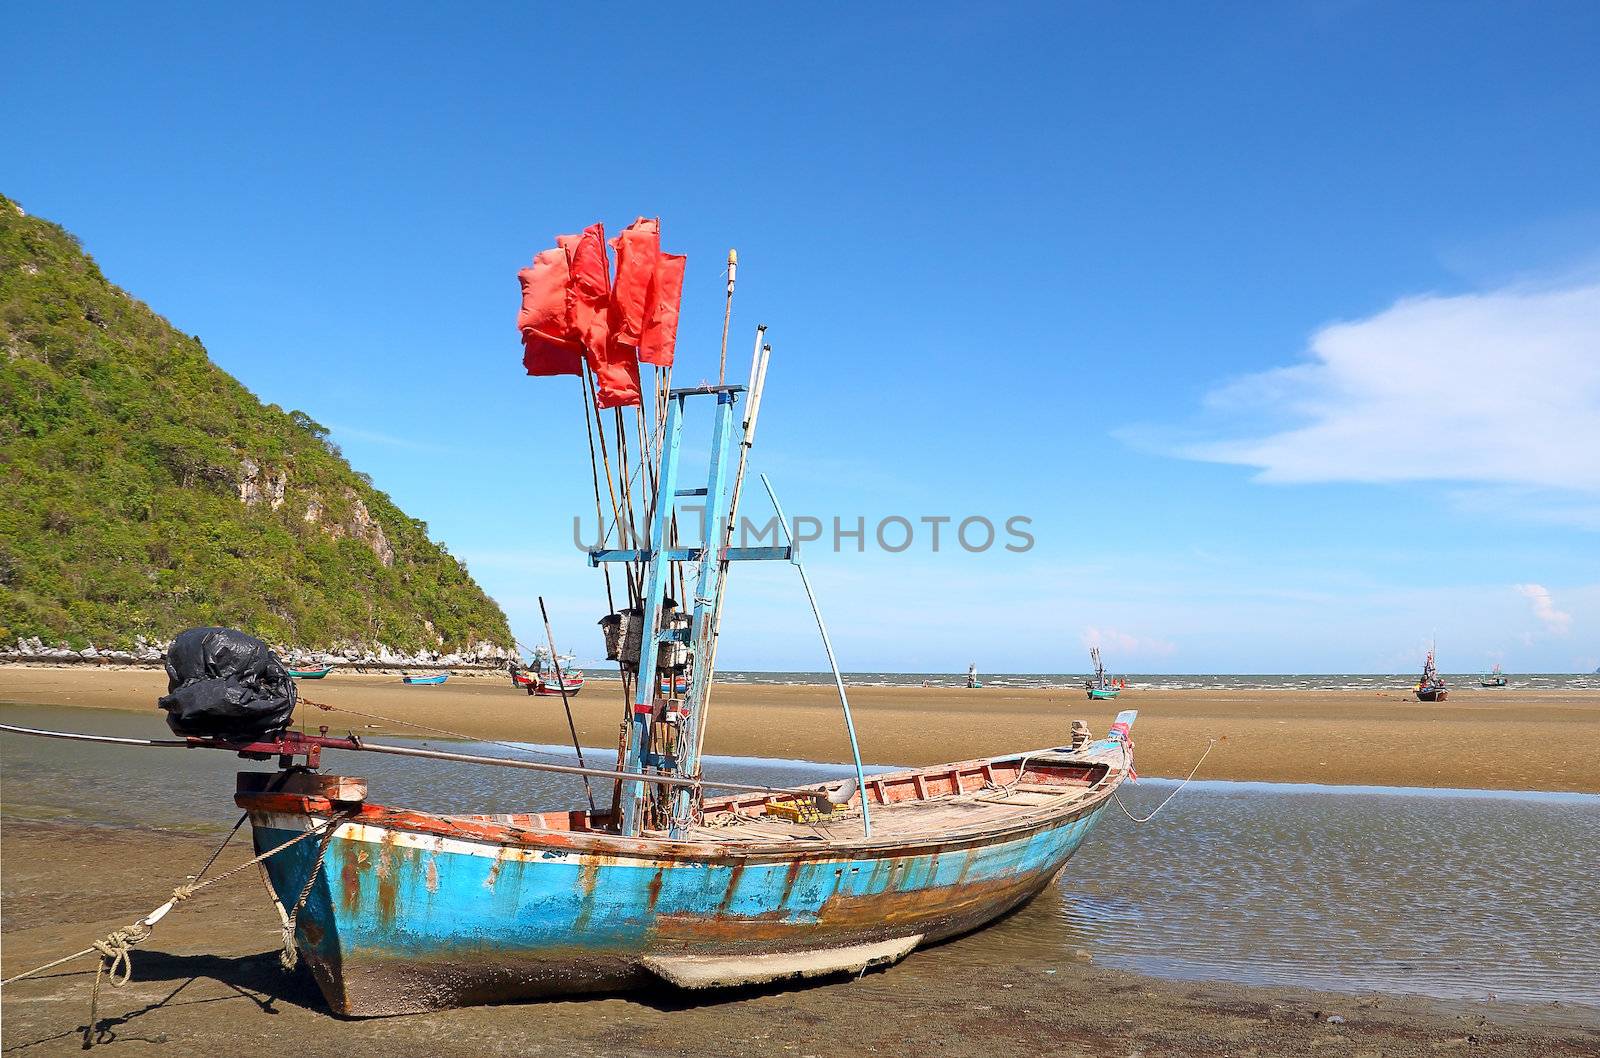 Fishing boat on the beach in front of the Pranburi sea in Thailand